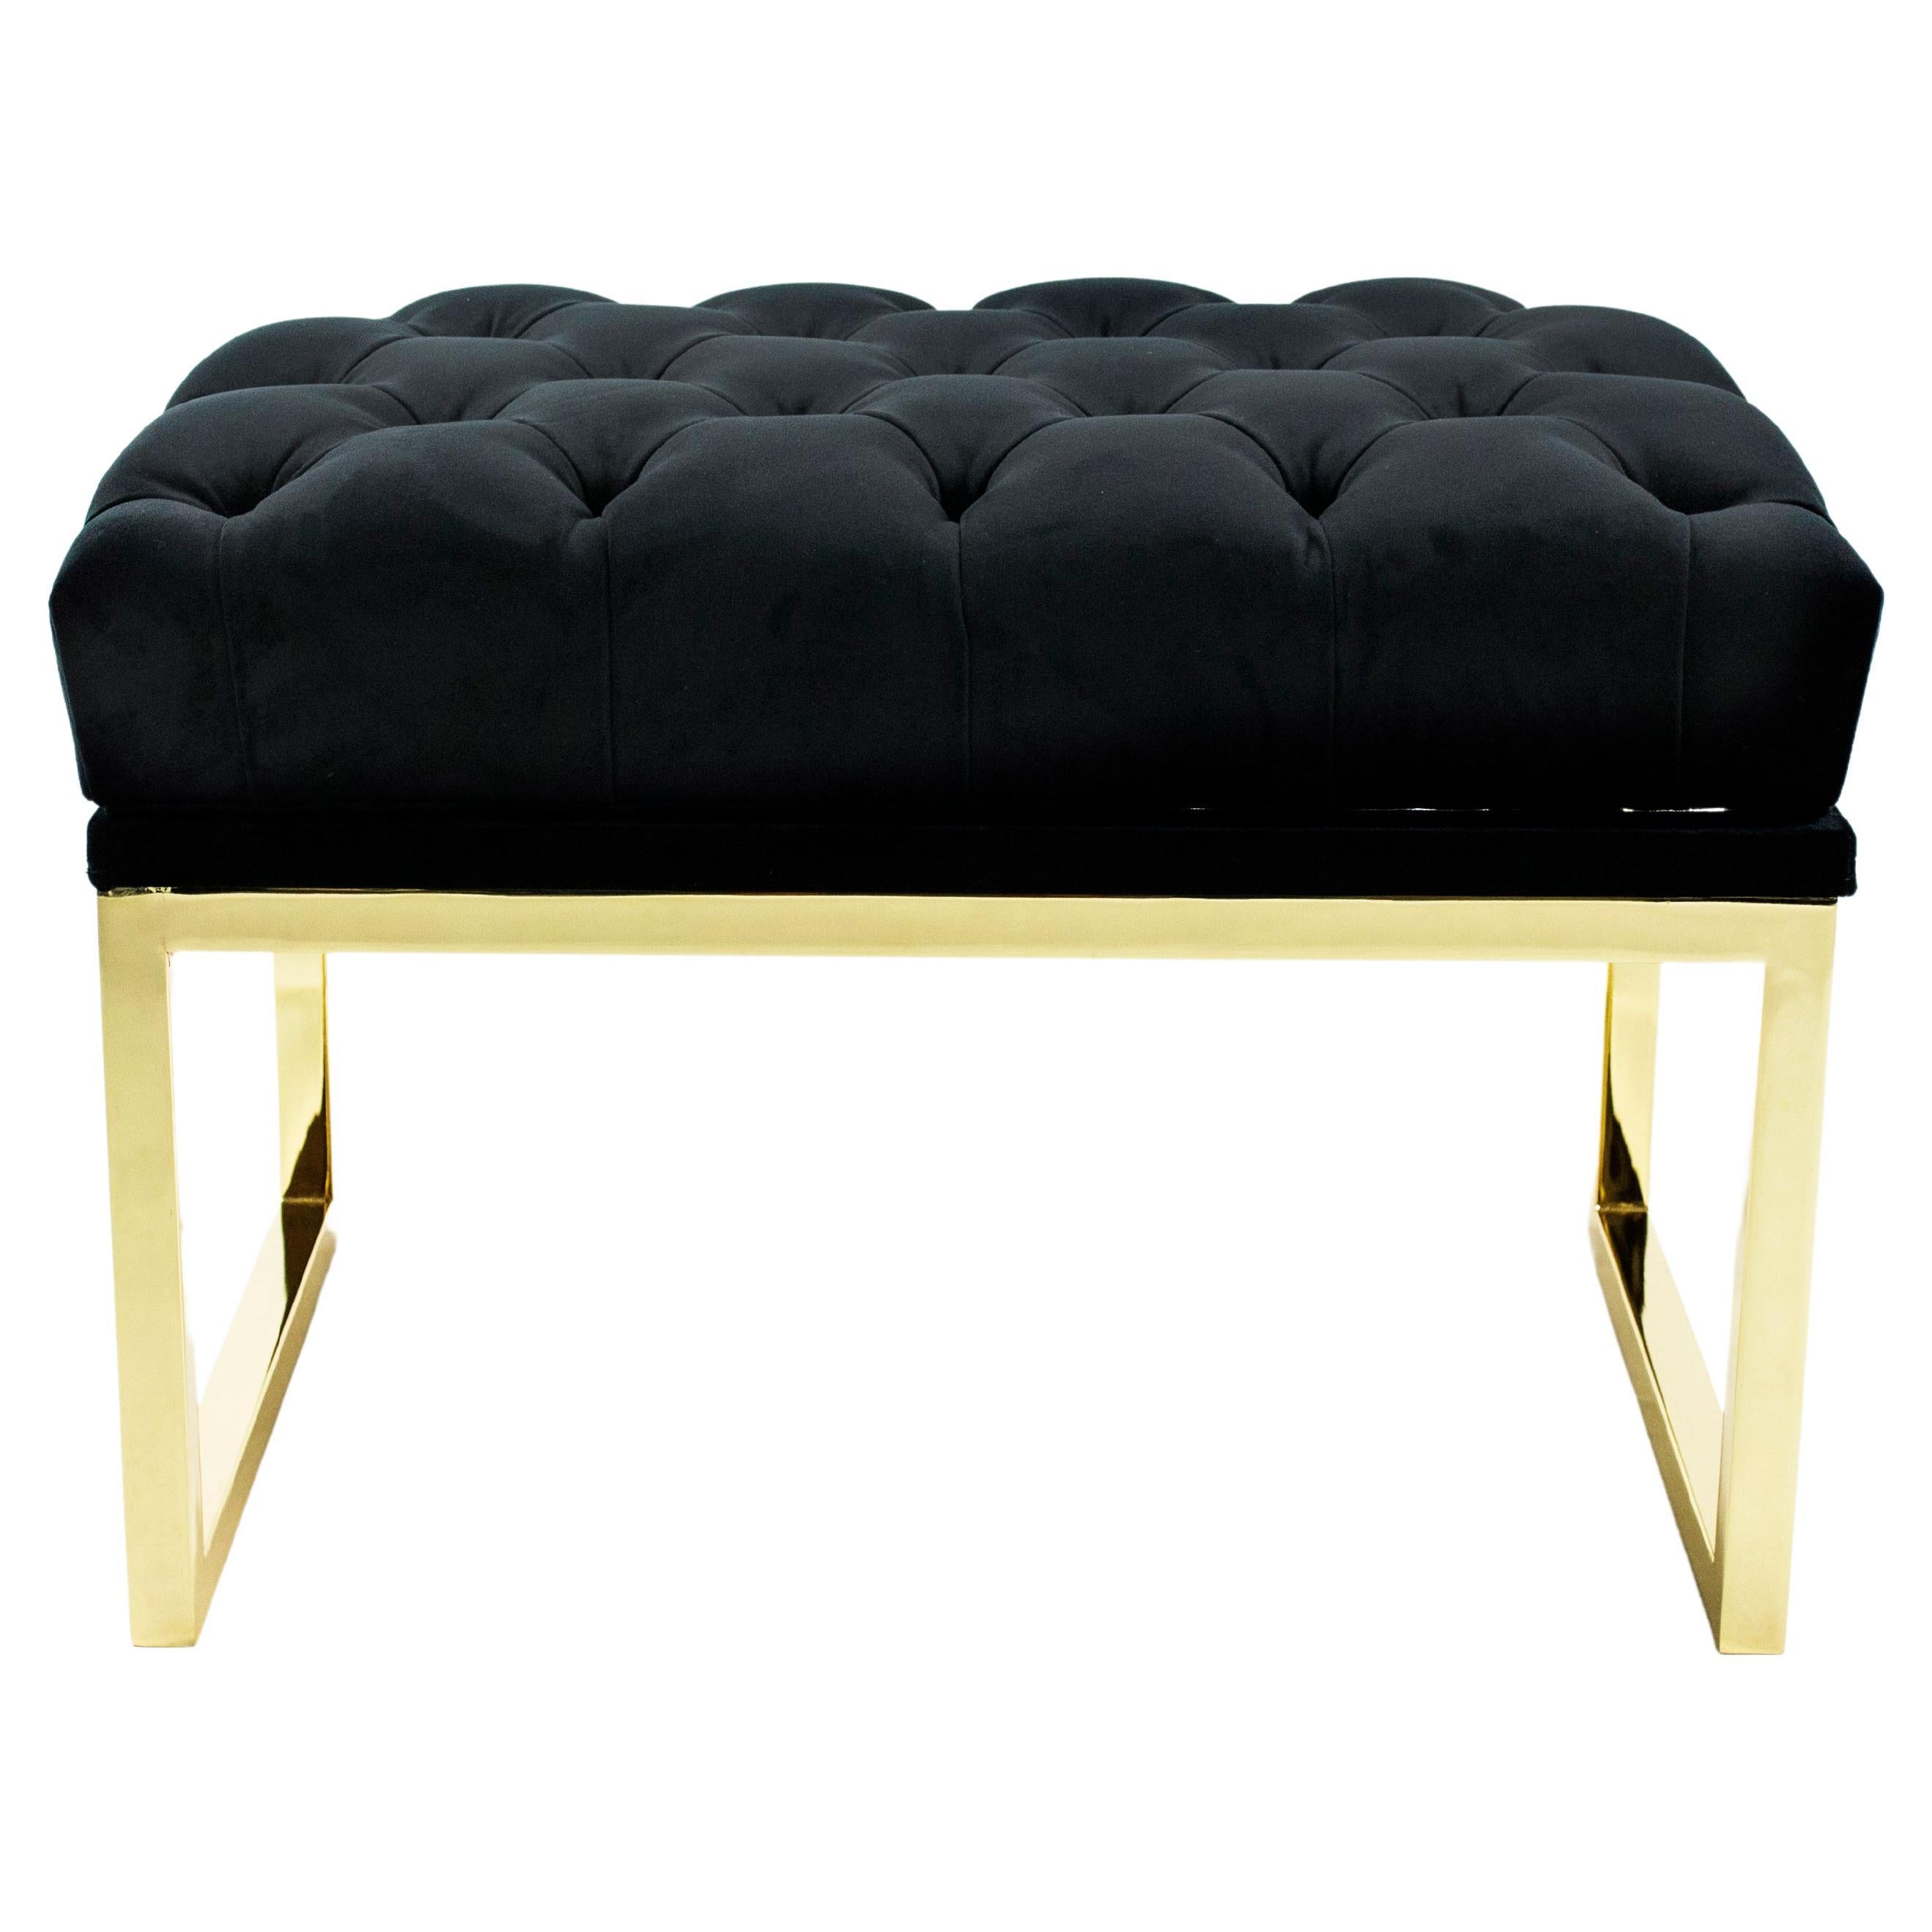 Malena Piano Bench is a a versatile piece to accompany your piano and also to use as a vanity stool. Design your own Piano stool by choosing between several velvet colors, leather or eco-leather  and chrome, black nickel or gold plating for the legs